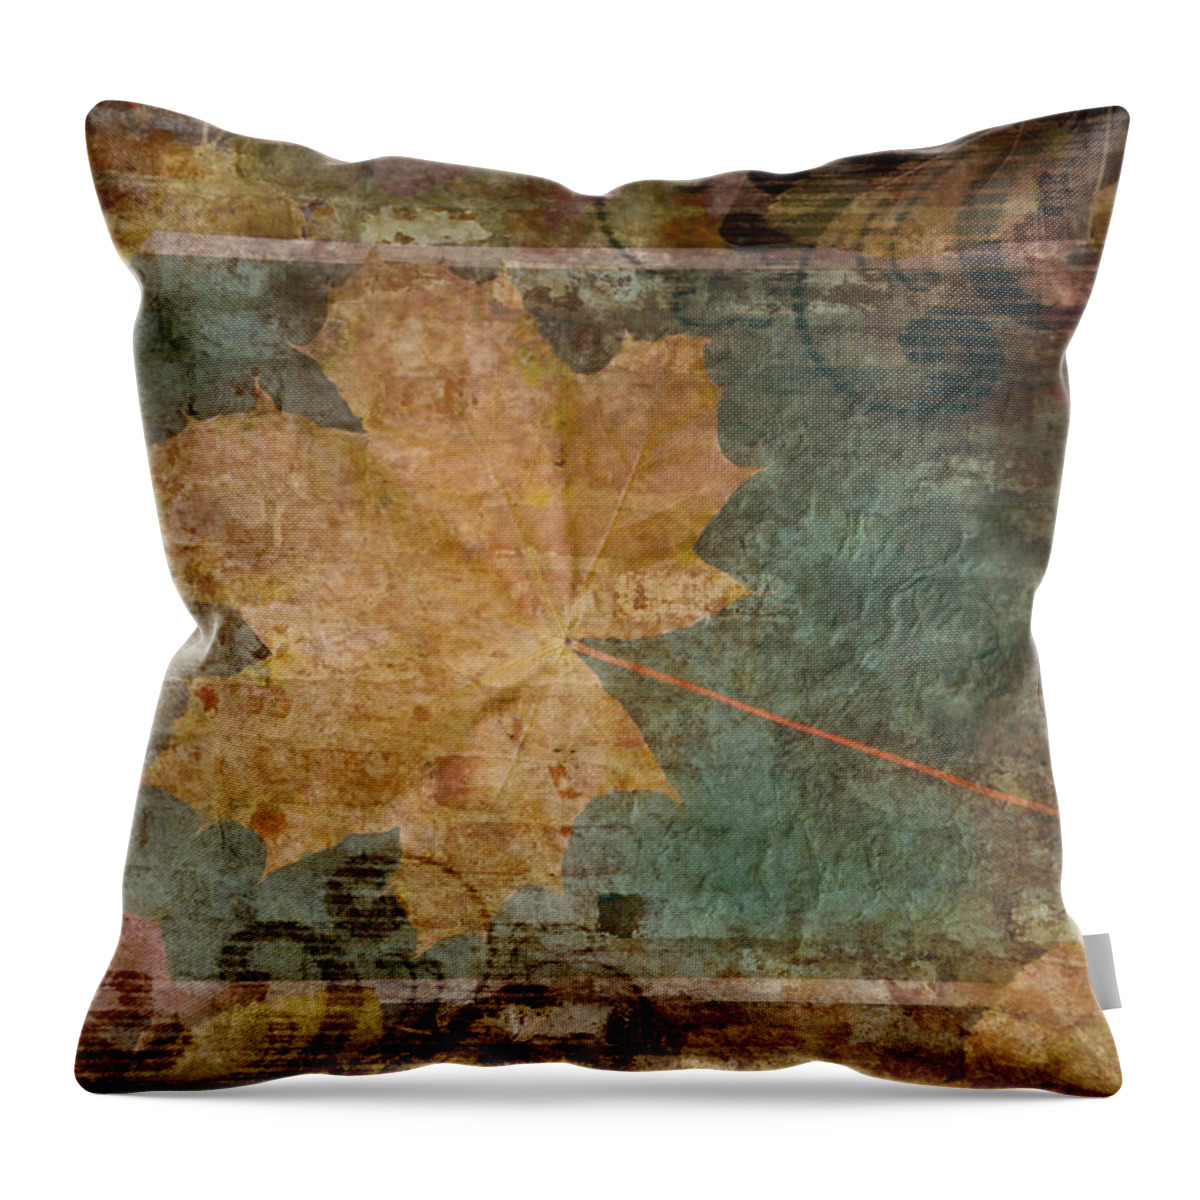 Autumn Throw Pillow featuring the photograph Ode To Autumn by Terri Harper